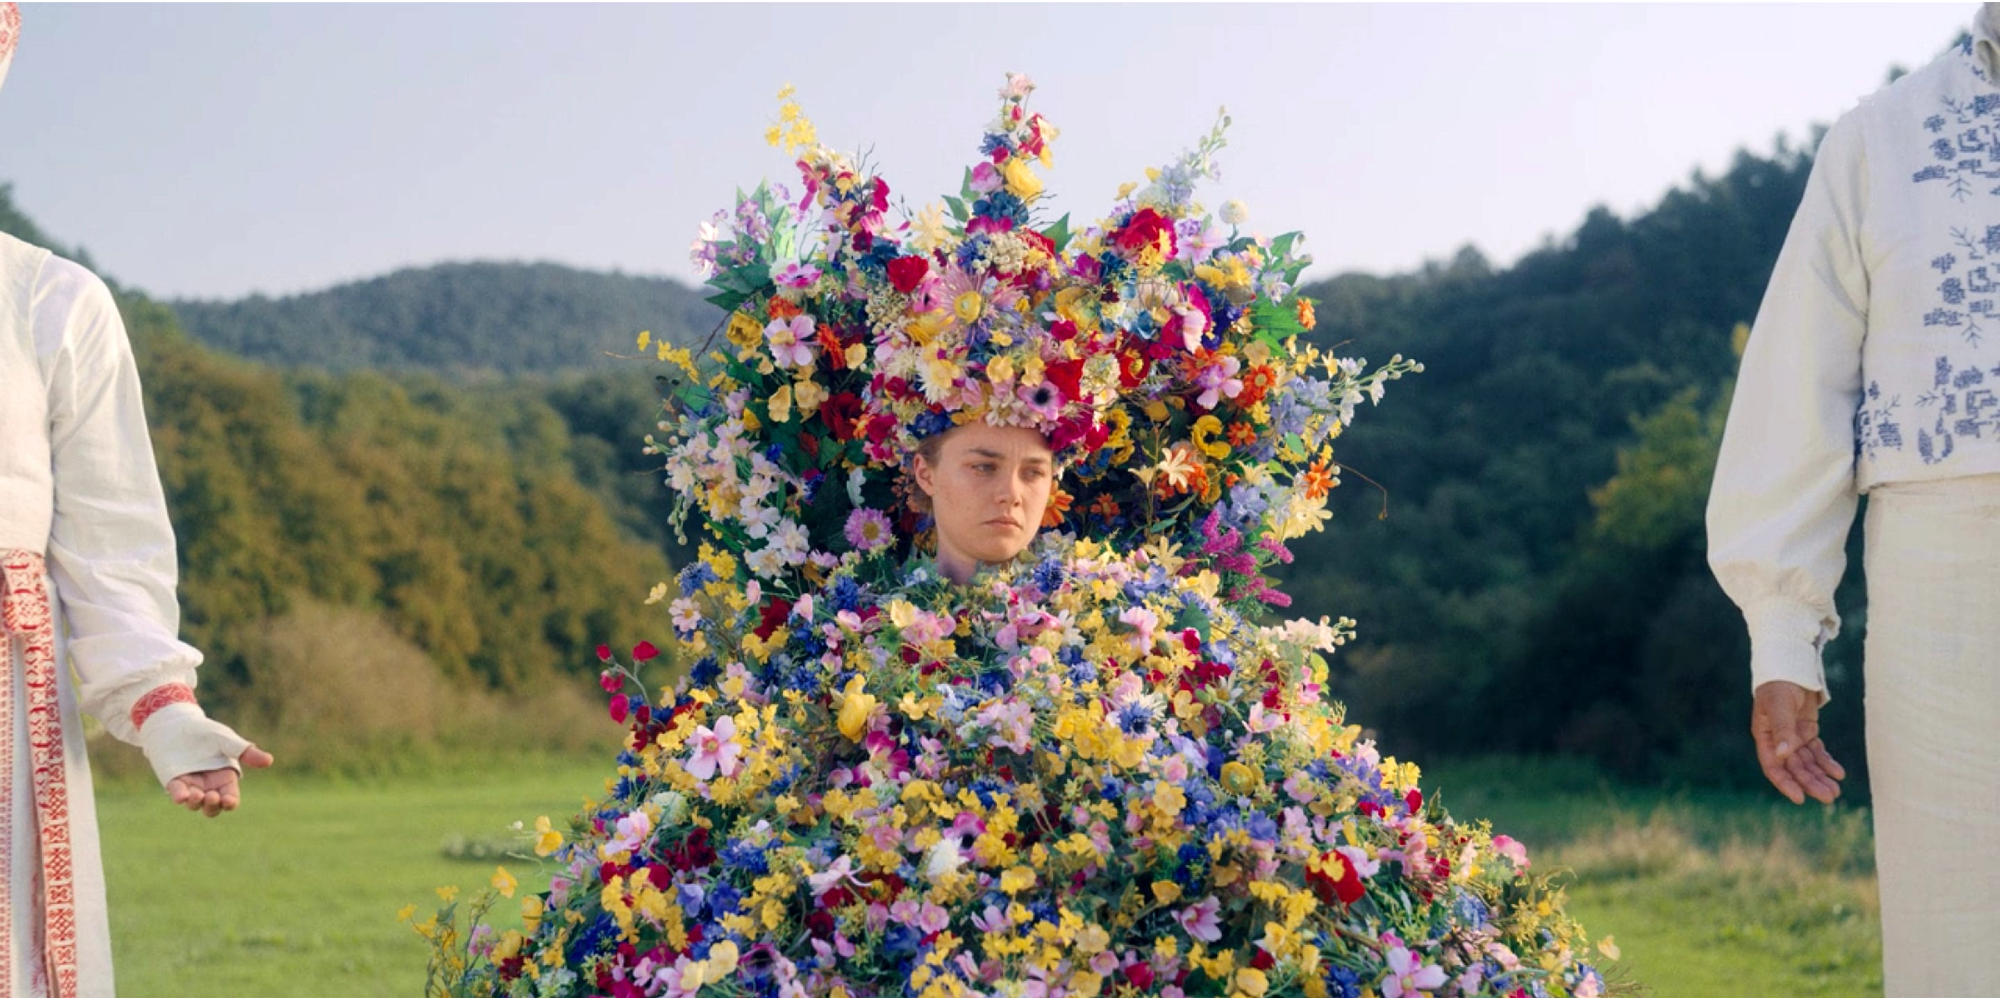 Dani ardorned as the may queen in Midsommar.